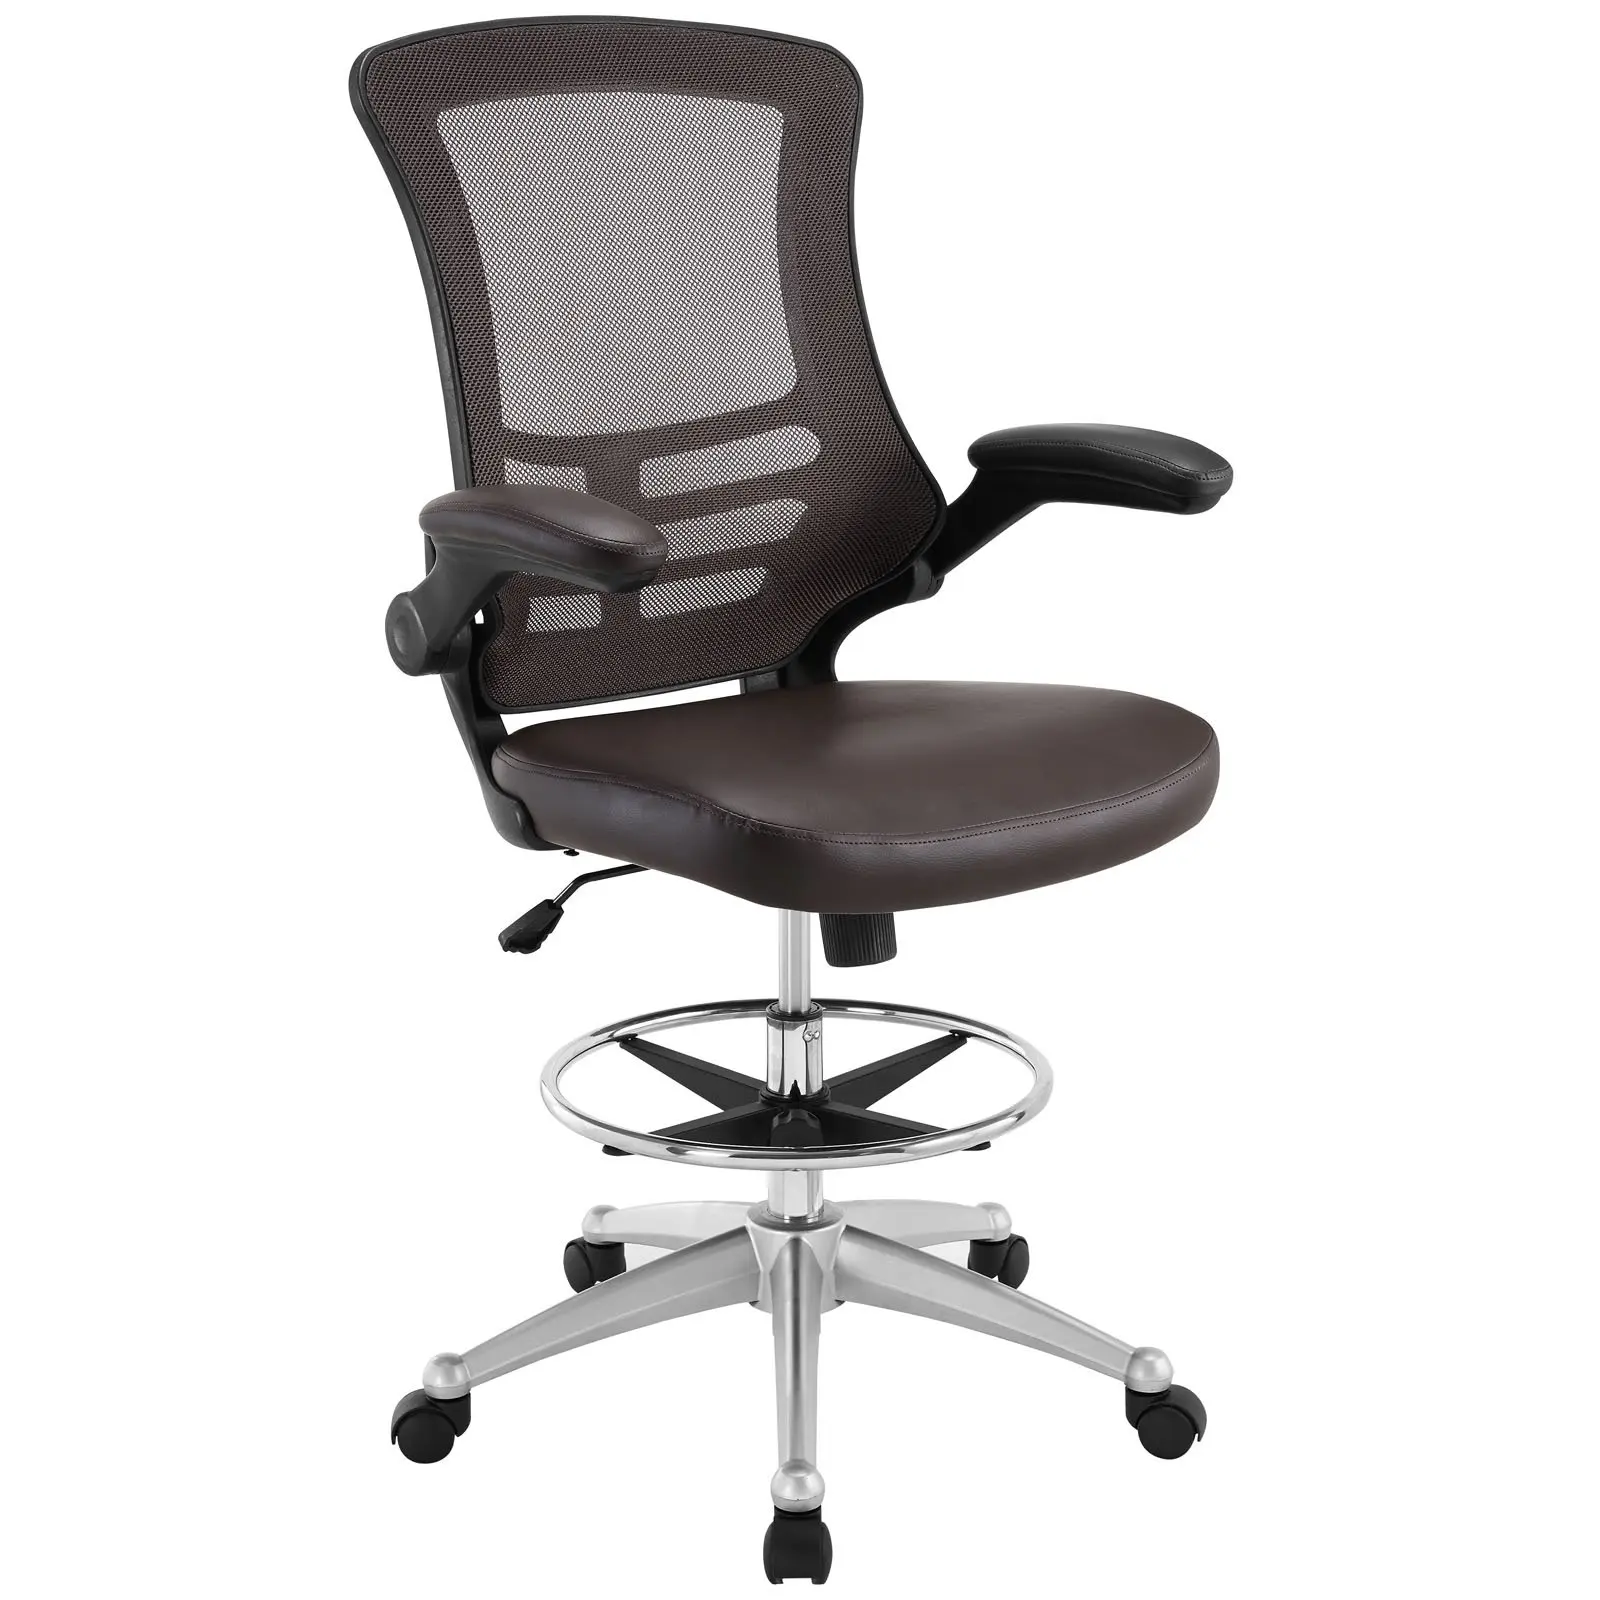 Cheap Standing Desk Chair, find Standing Desk Chair deals on line at